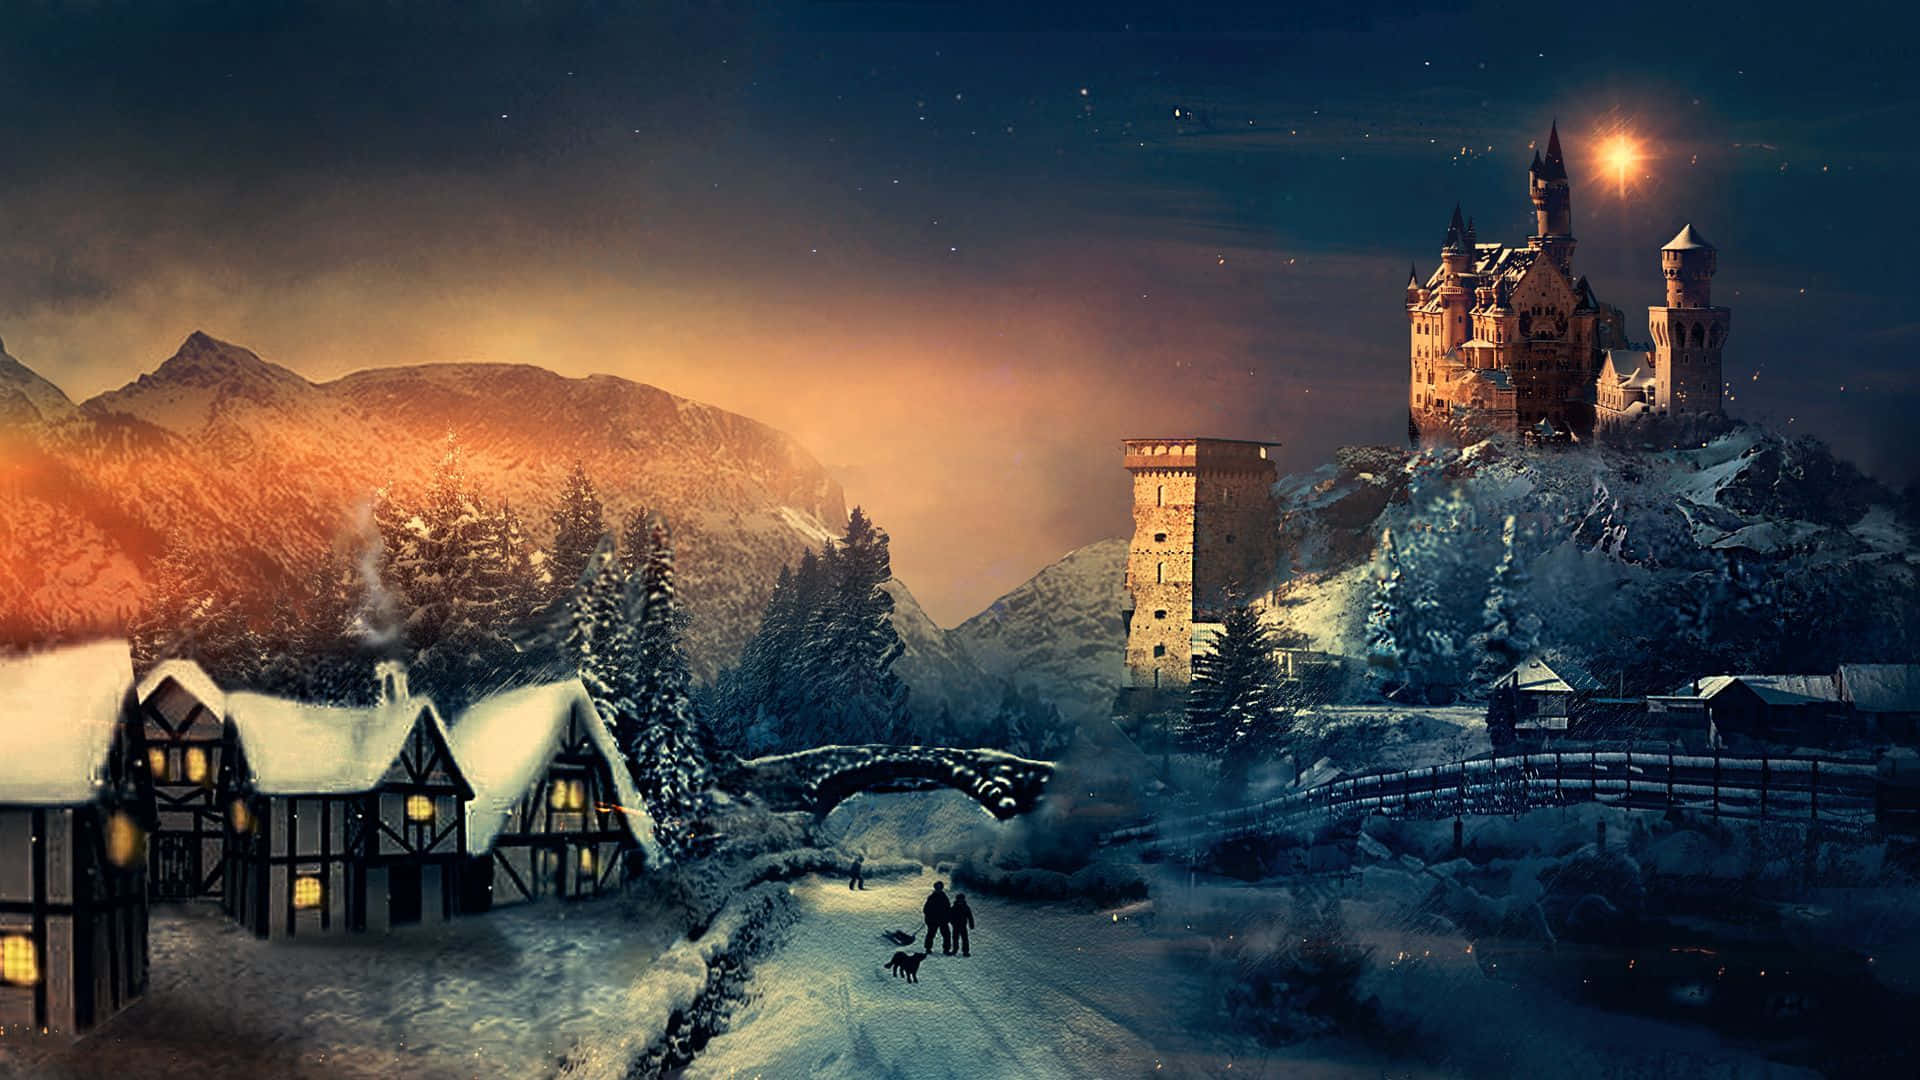 The Beauty of Winter in Old Times Wallpaper